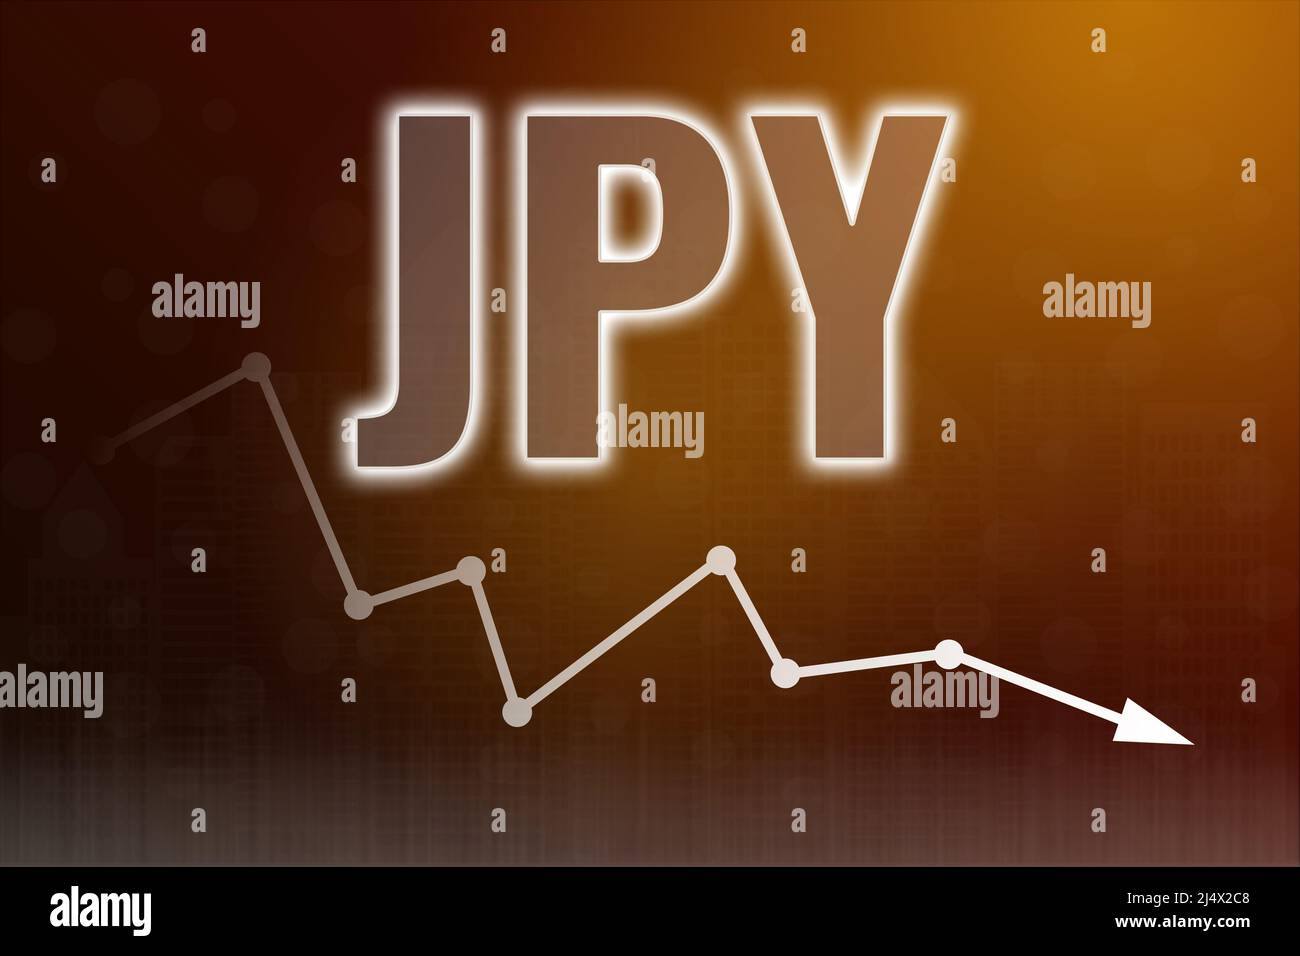 Price change on JPY (Japanese Yen) on brown finance background. Currency market concept Stock Photo